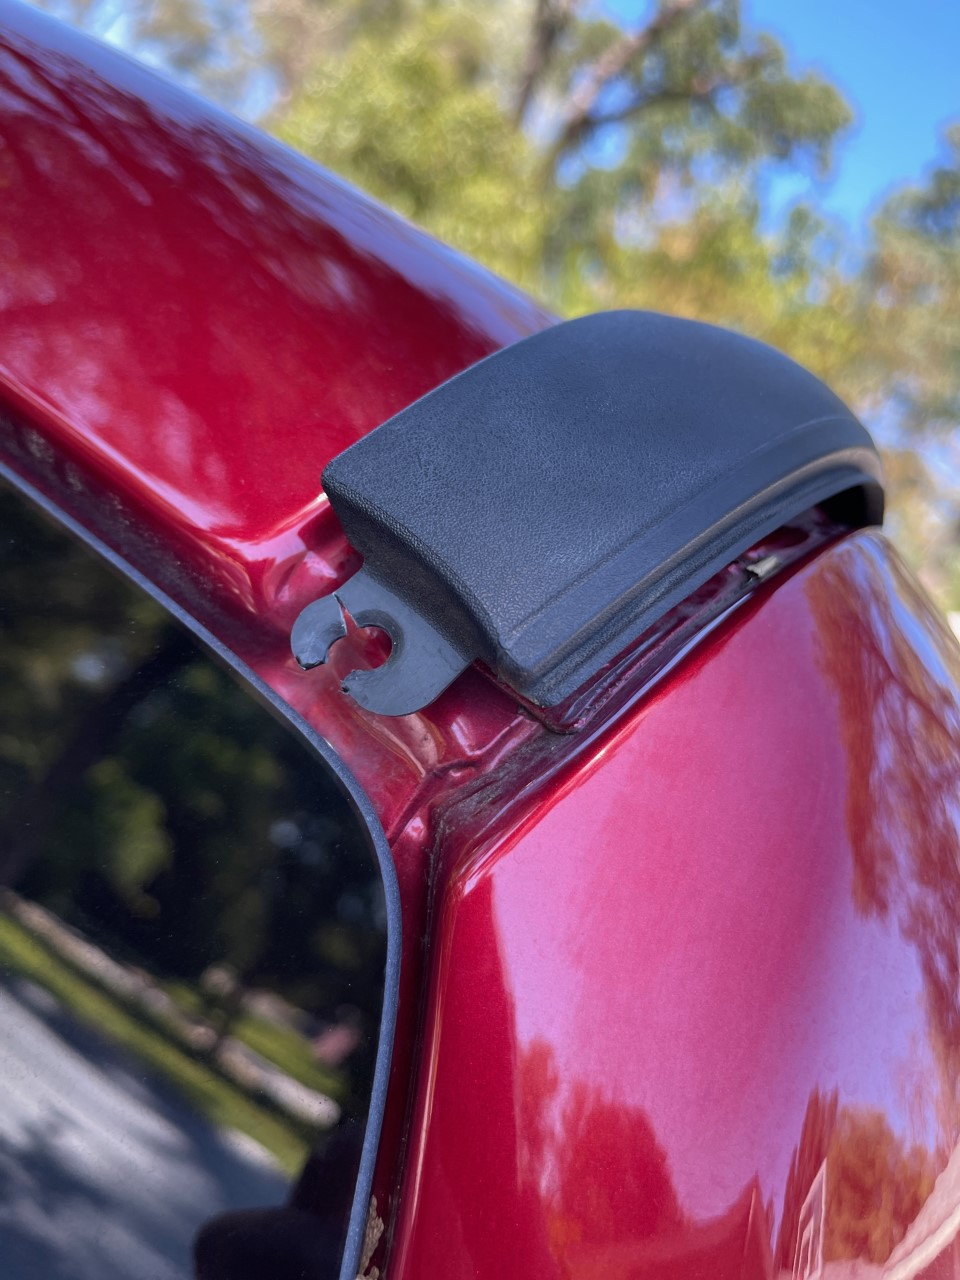 Broken clip on roof trim end cap - Ford Truck Enthusiasts Forums